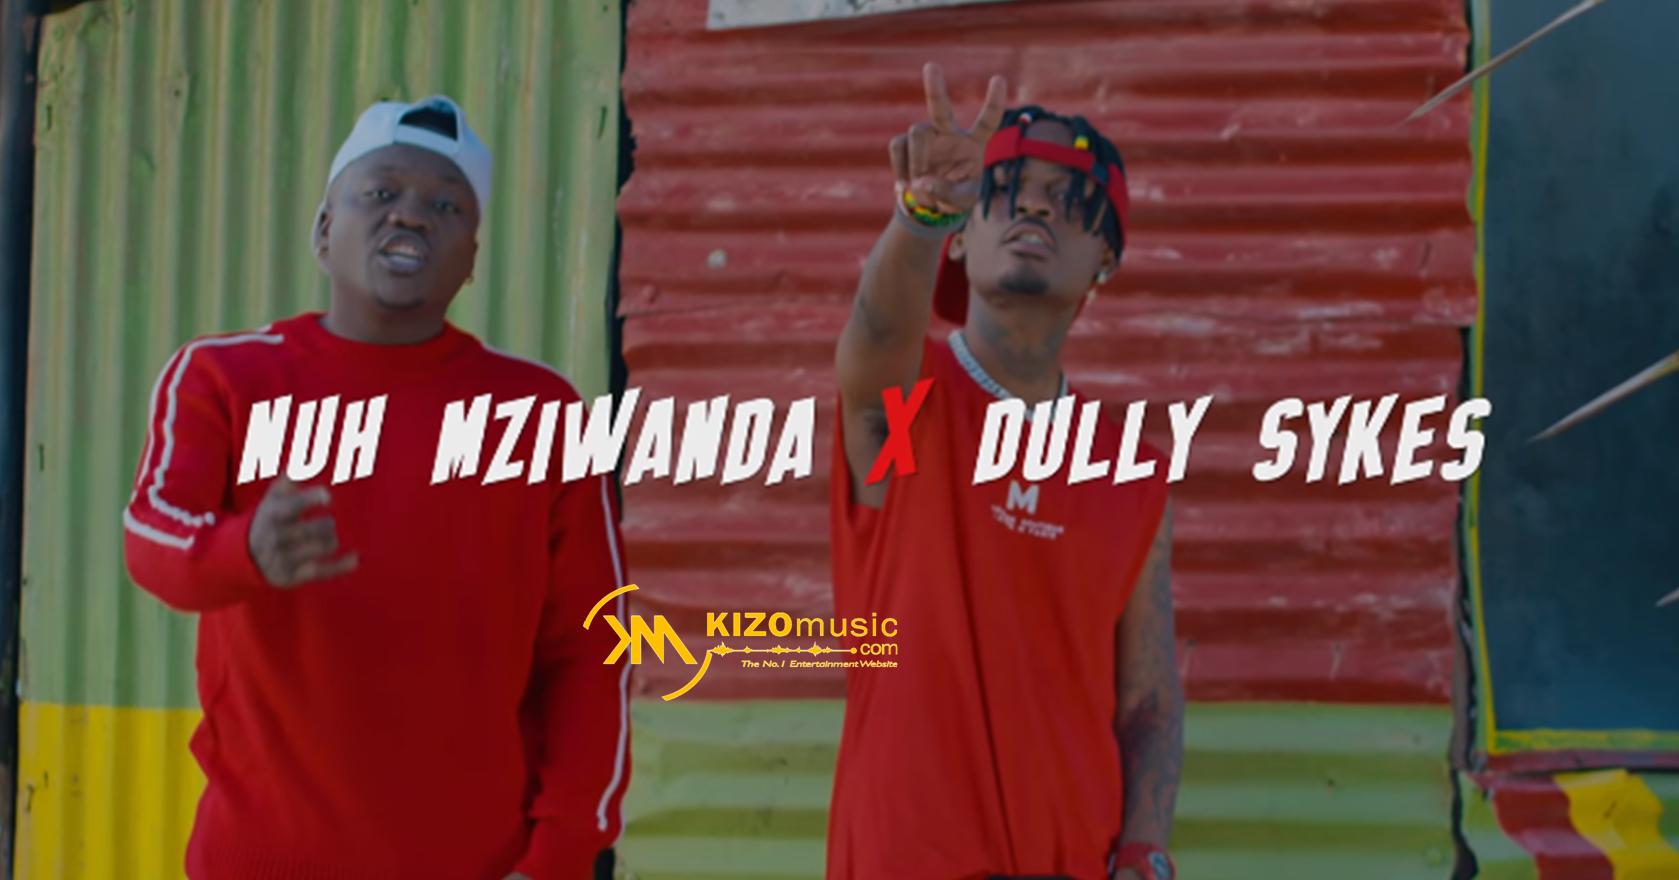 Dully Sykes featured in Nuh Mziwanda’s ‘Machete’